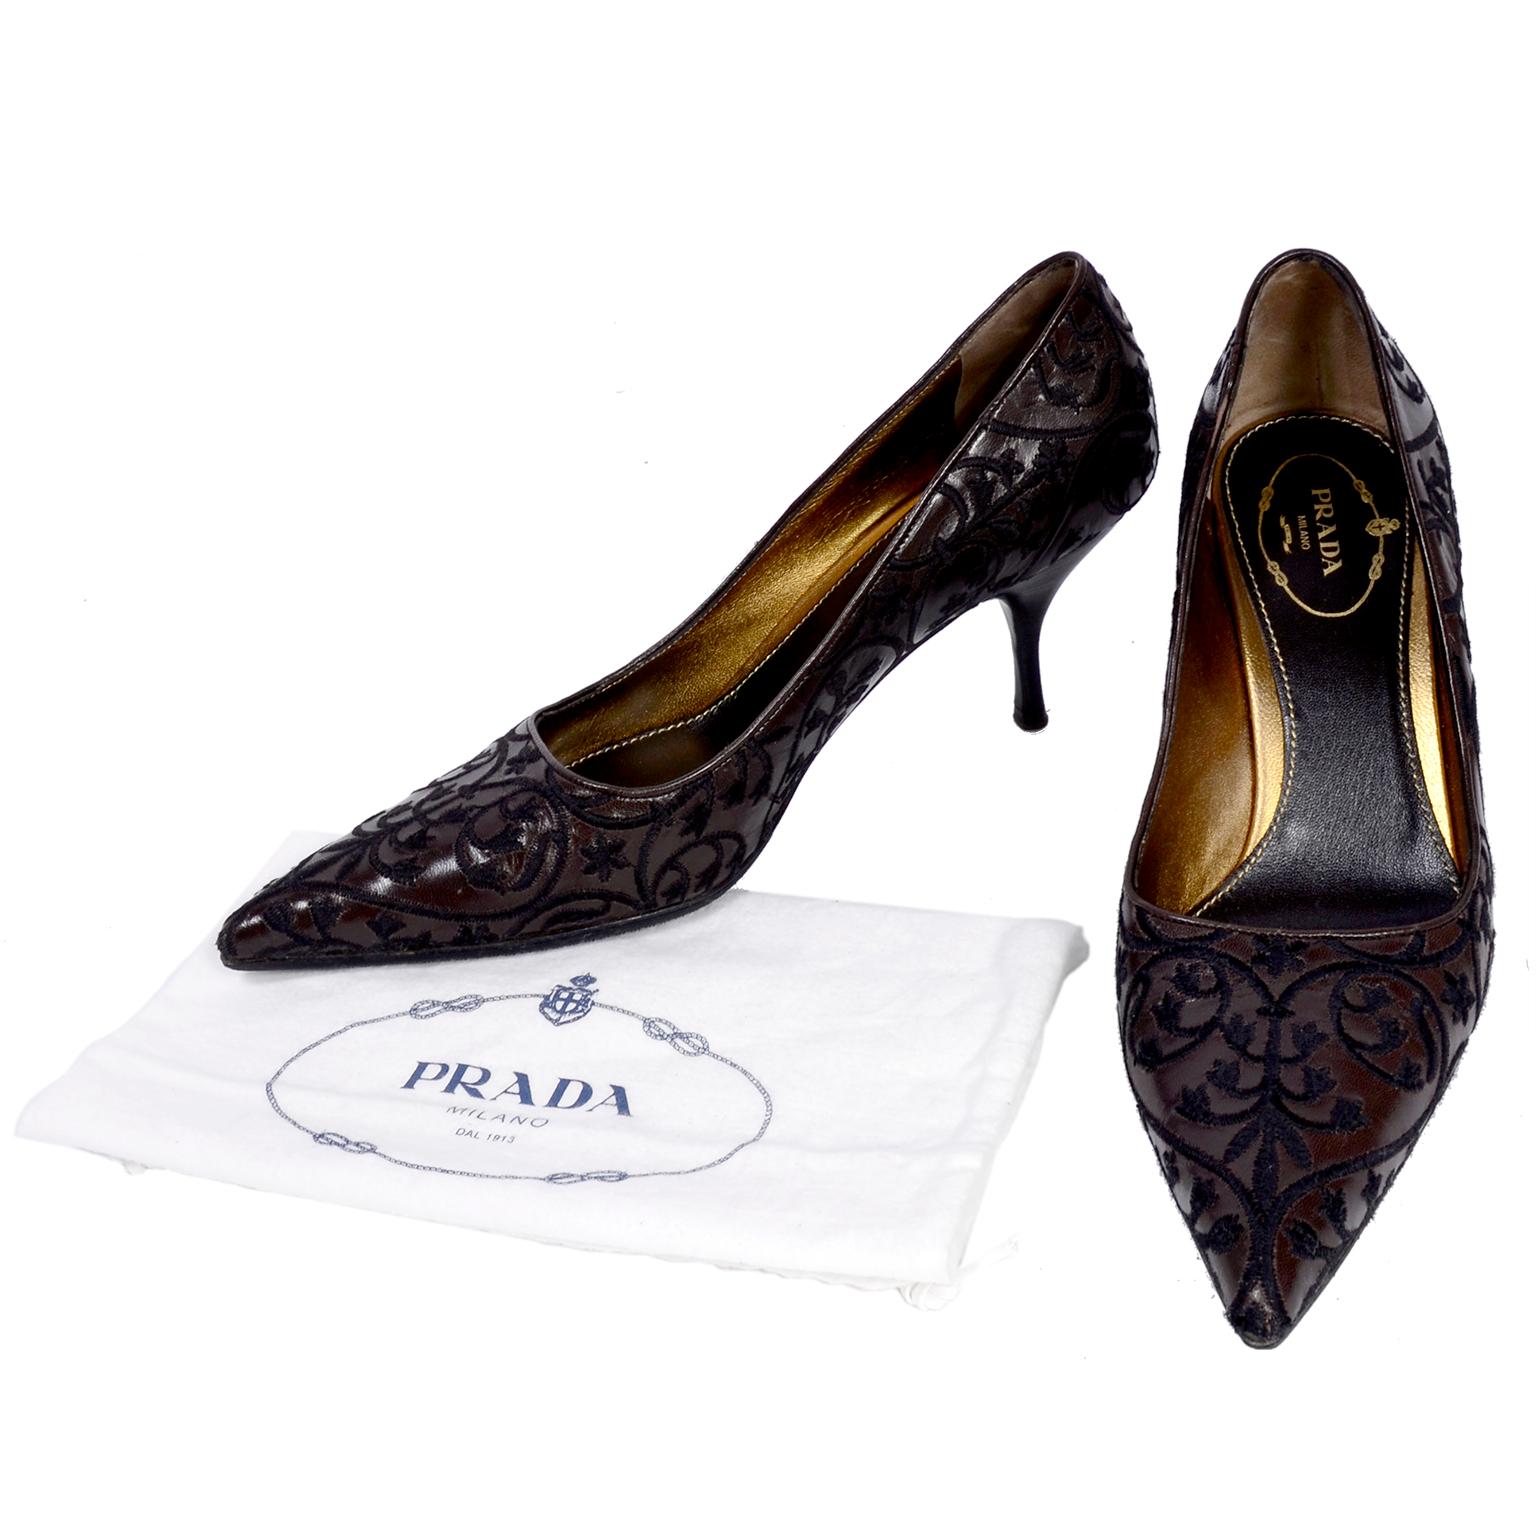 We adore these pointed toe Prada Milano heels in shiny brown leather. The shoes are embroidered with dark brown thread in swirling flowers and vines. These beautiful pumps were made in Italy and are marked a size 37 1/2. These Prada shoes come with